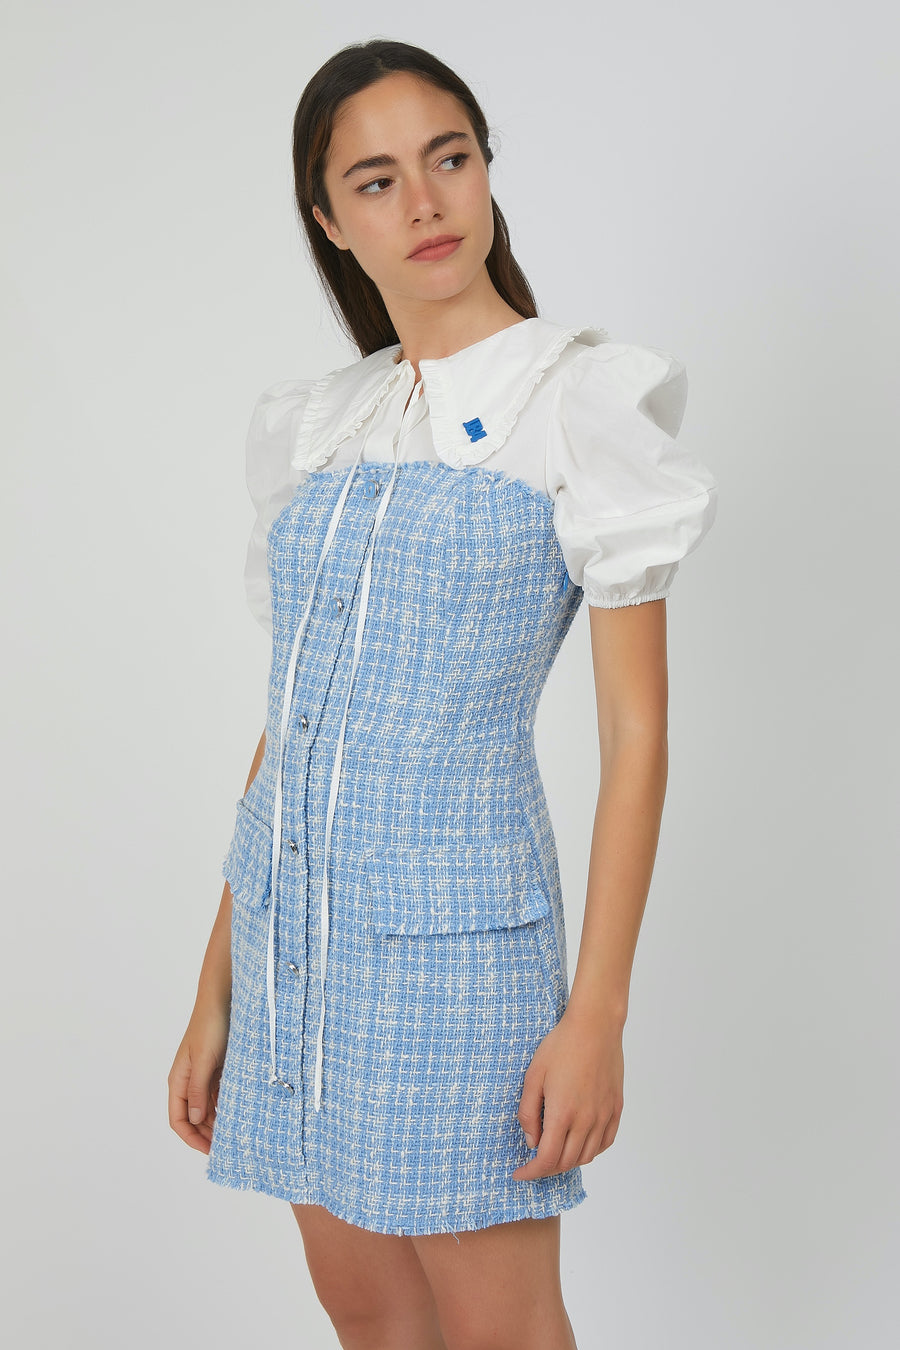 DRESS IN CHANEL FABRIC WITH LIGHT BLUE POPLIN SLEEVES